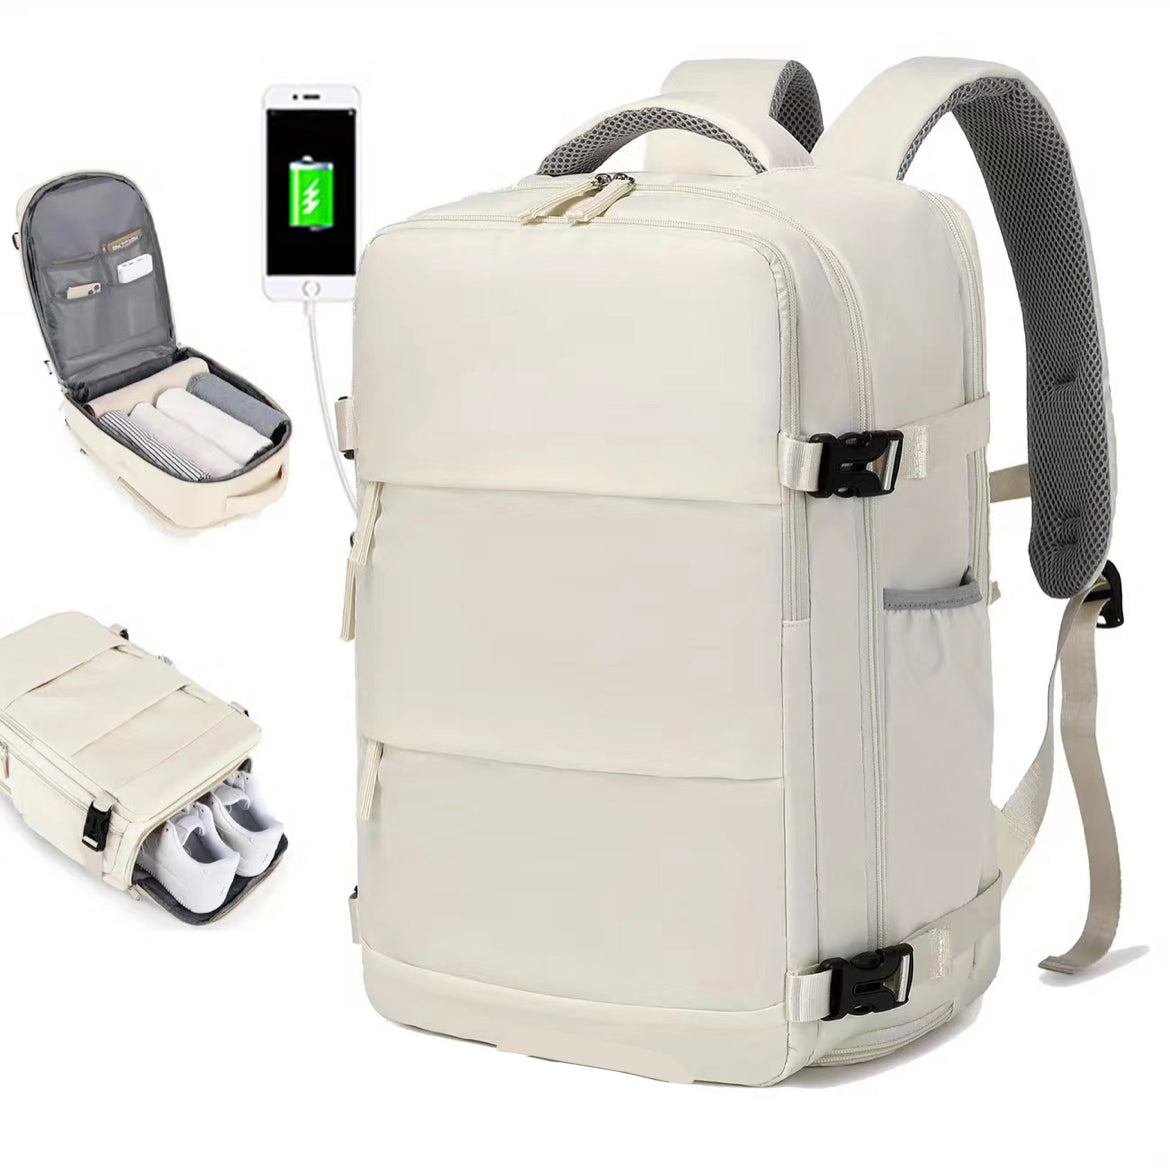 Under-the-Seat Personal Bag Travel Backpack